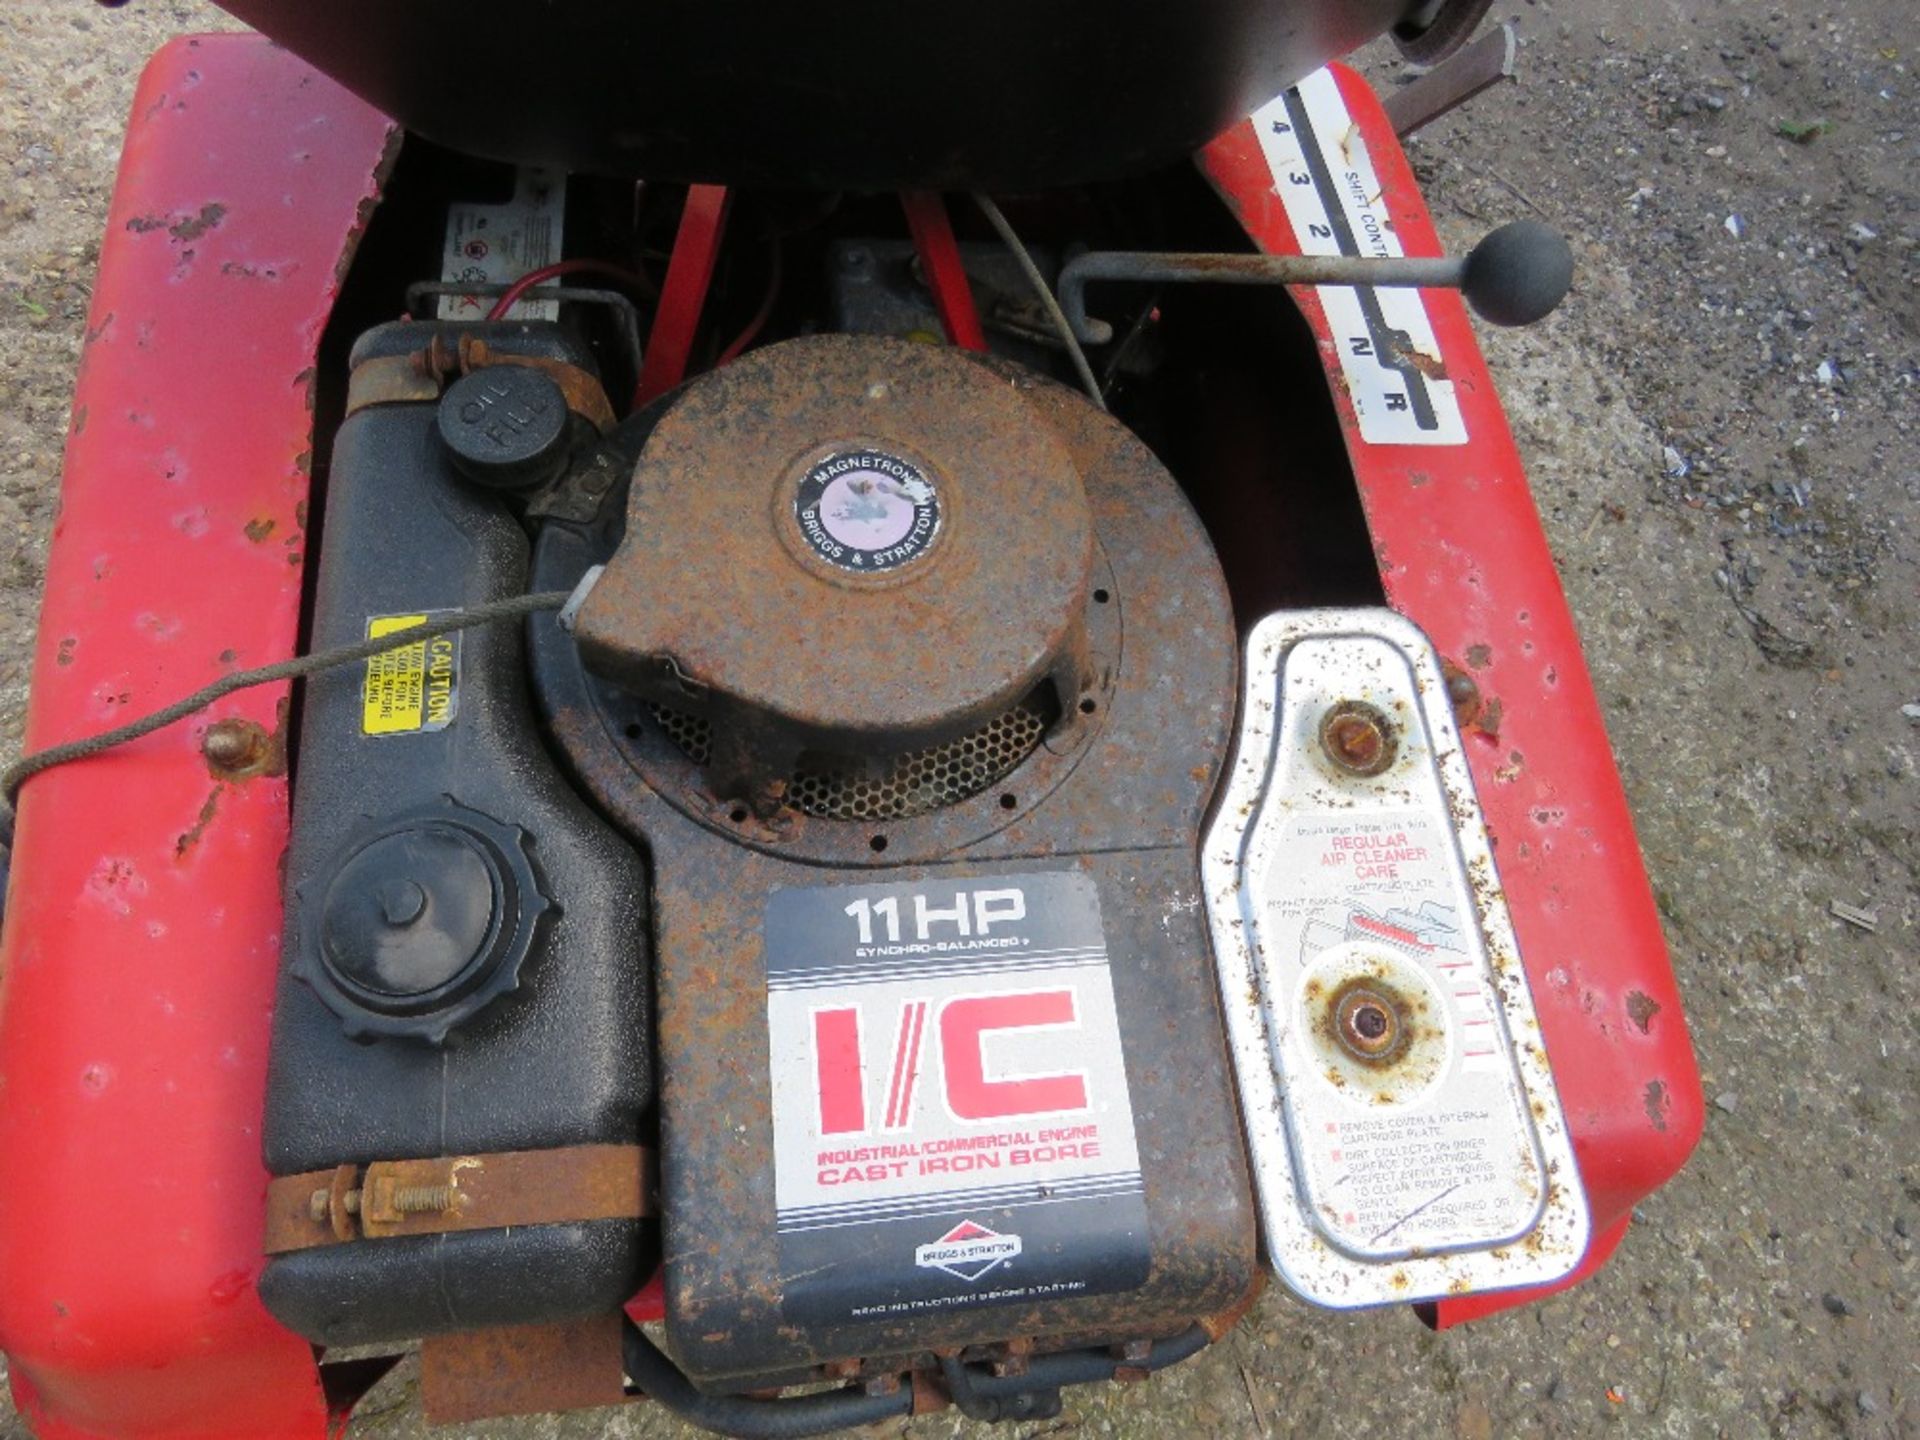 PETROL ENGINED RIDE ON MOWER. THIS LOT IS SOLD UNDER THE AUCTIONEERS MARGIN SCHEME, THEREFORE NO - Image 4 of 6